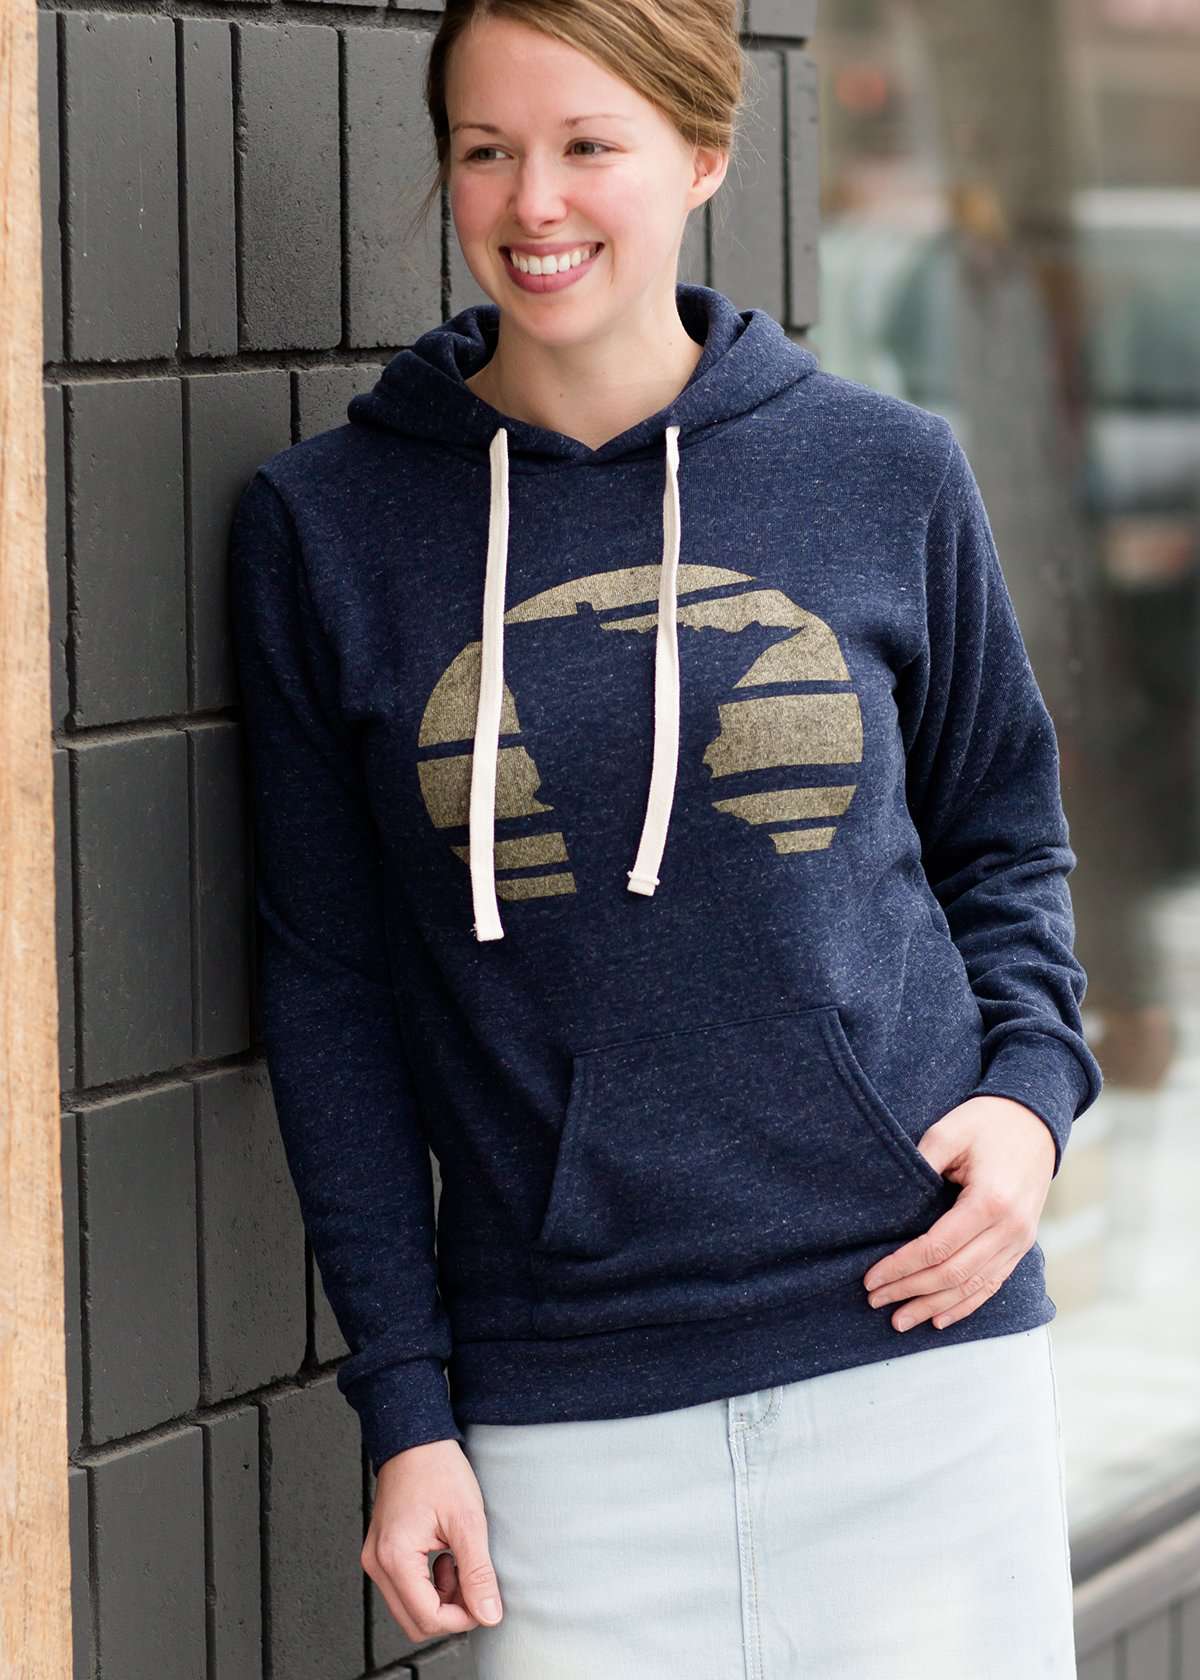 Triblend Minnesota hoodie on a young woman, the hoodie is navy with a gold MN emblem on front and gray with a purple MN emblem on front.